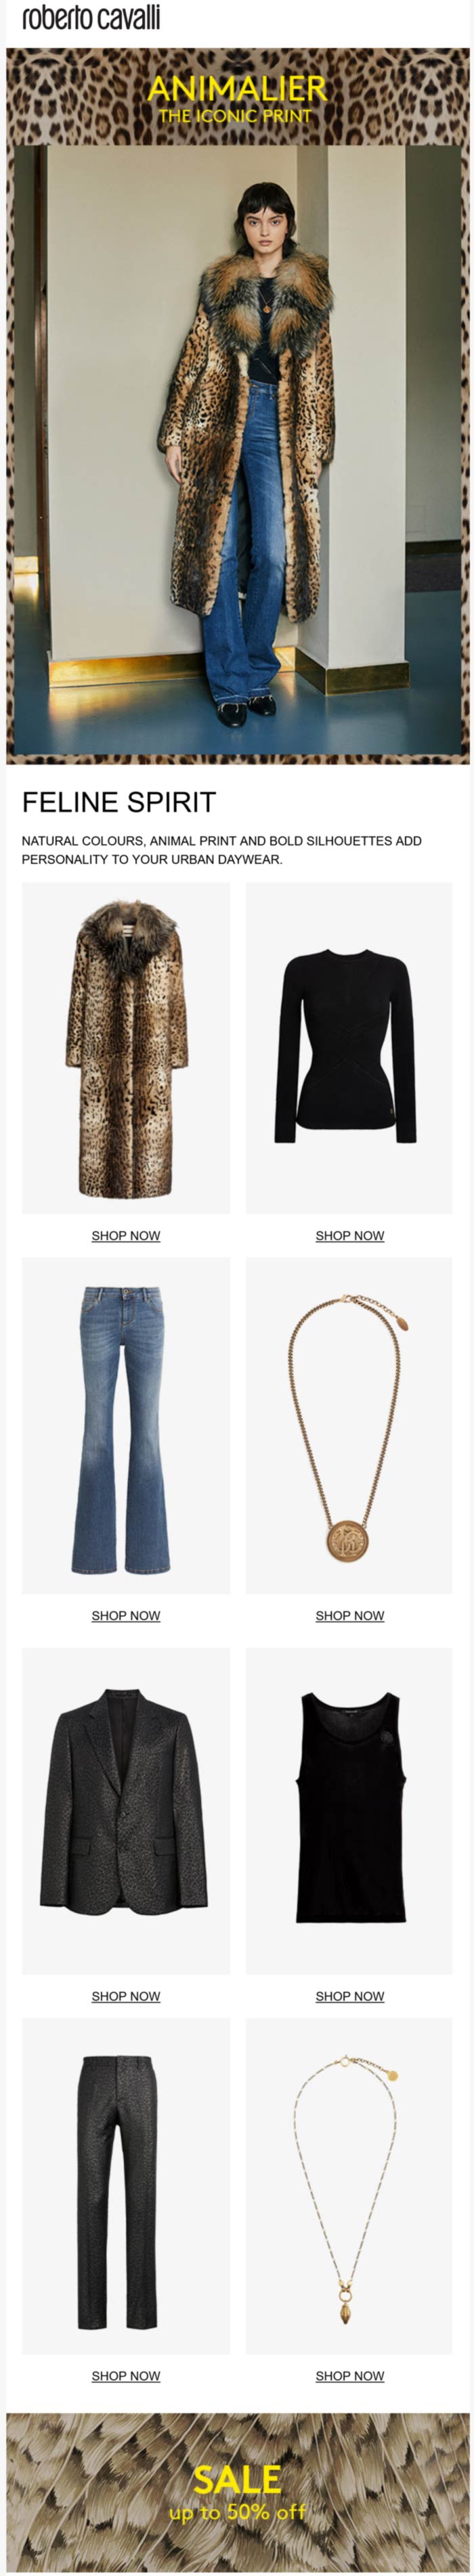 Roberto Cavalli stores Coupon  50% off sale going on at Roberto Cavalli #robertocavalli 